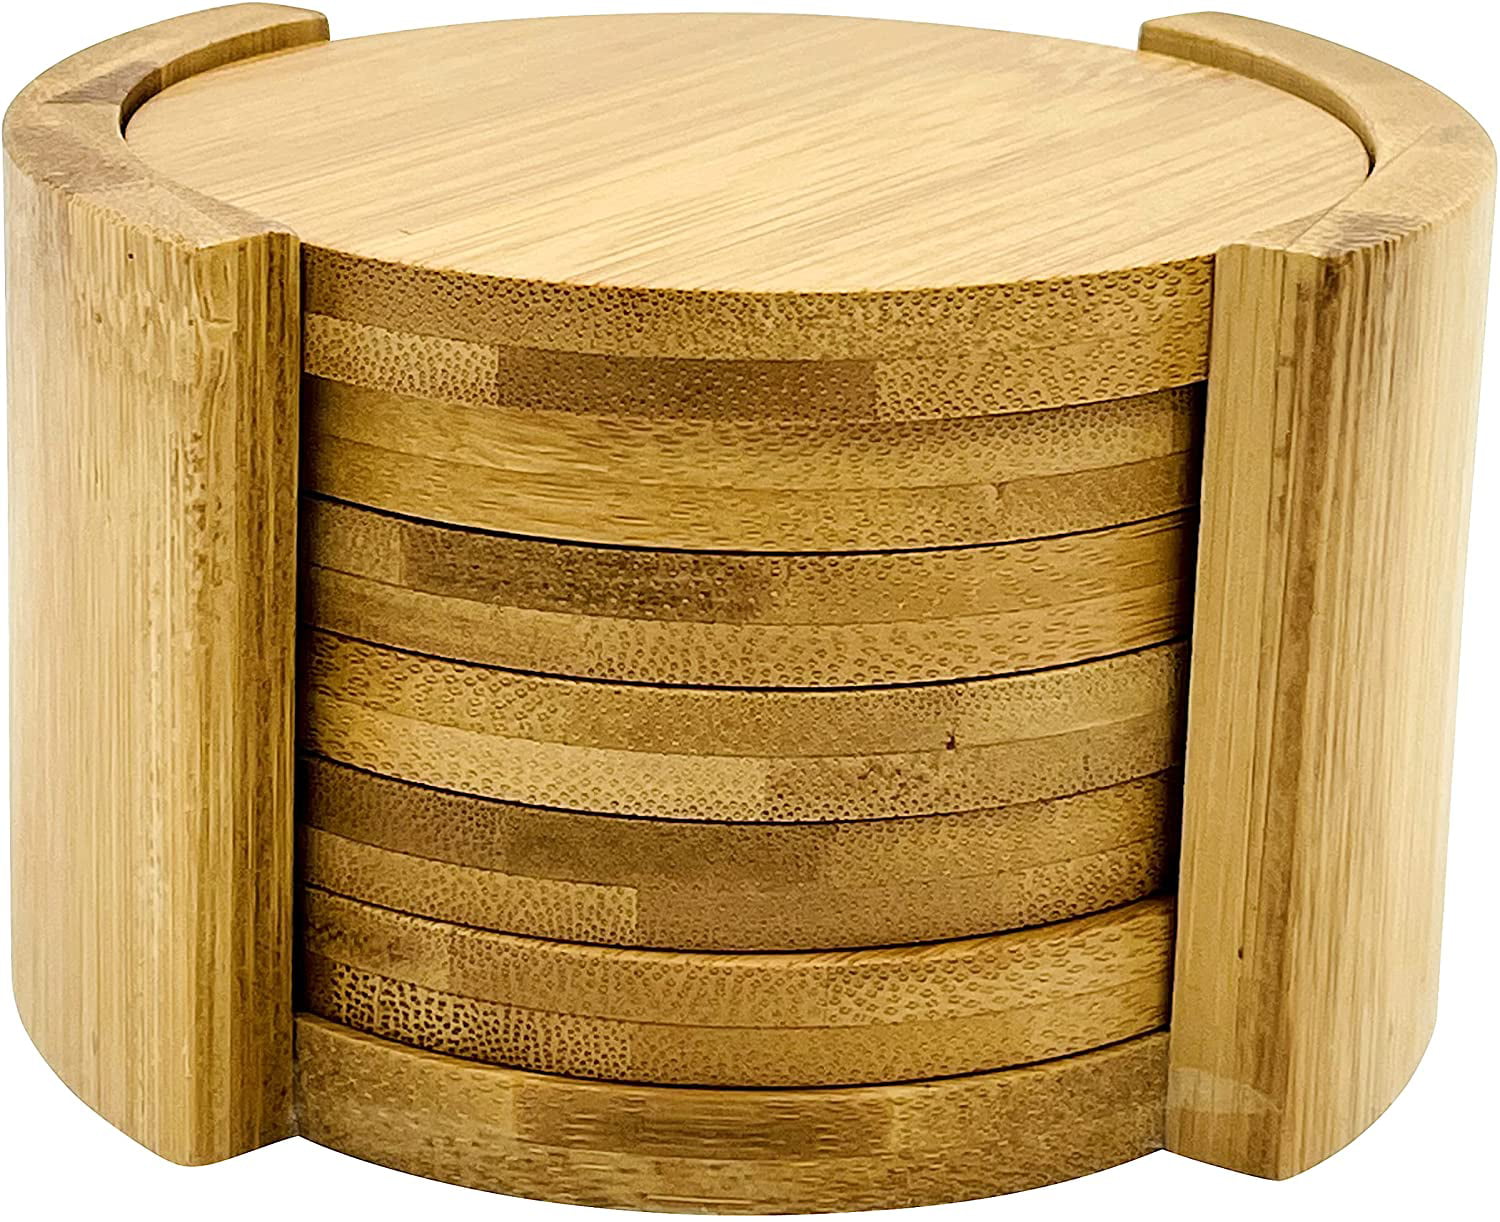 Bamboo Round Coaster Teacup Serving Tray 